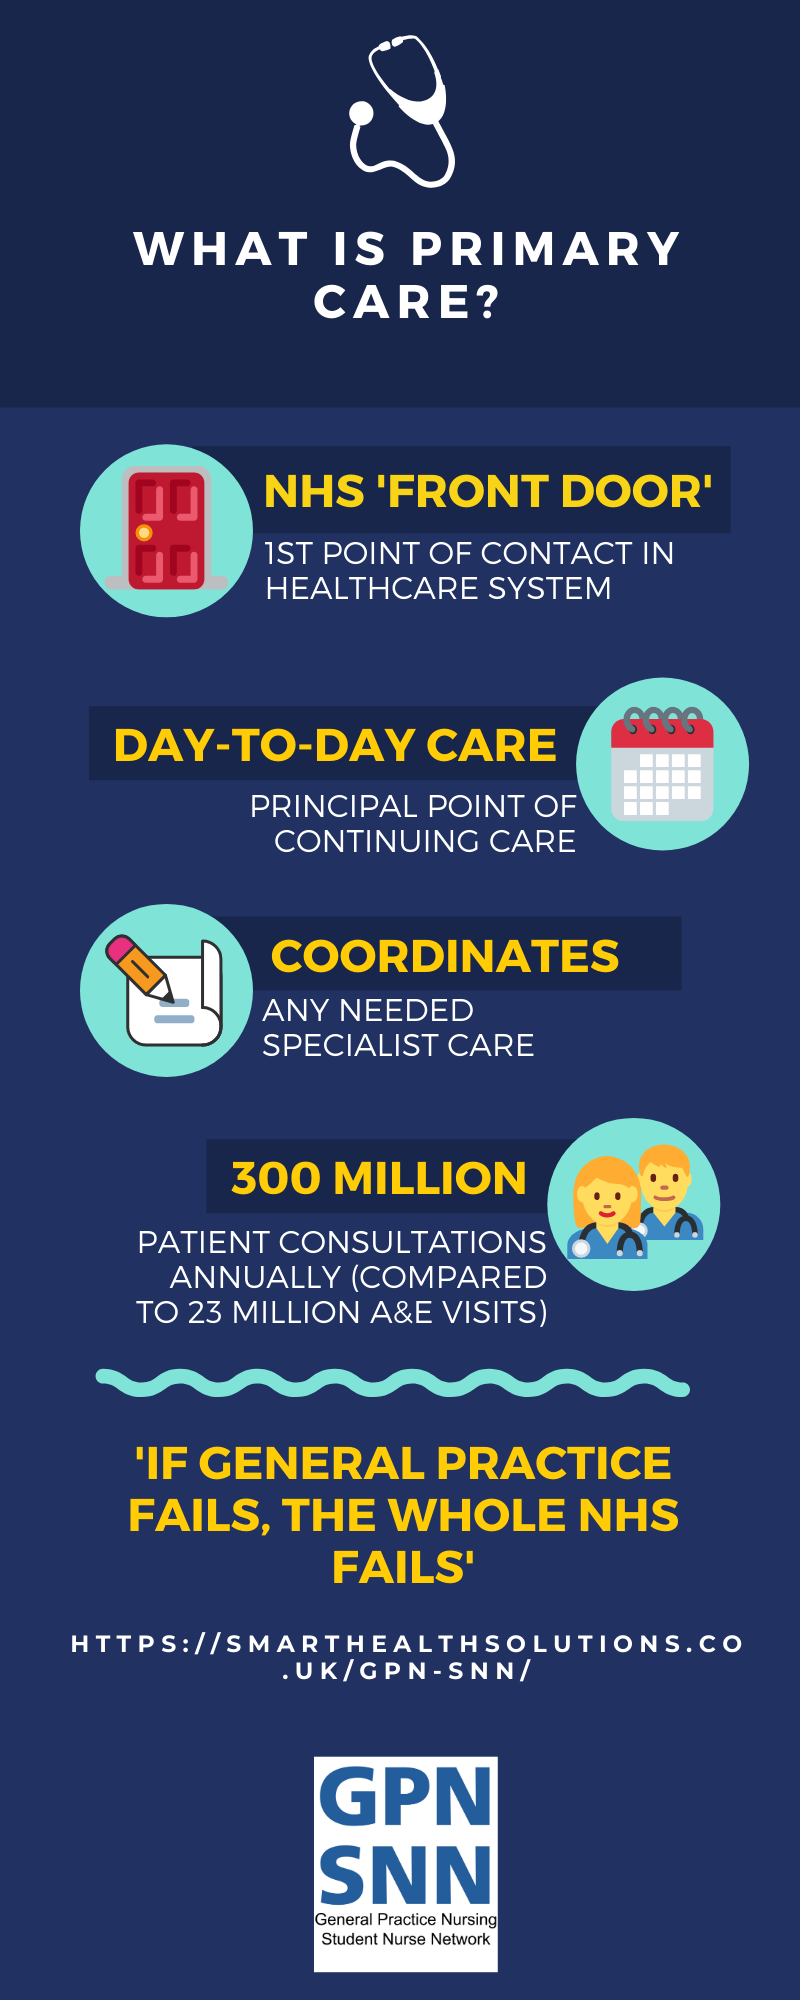 infographic-what-is-primary-care-smart-health-solutions